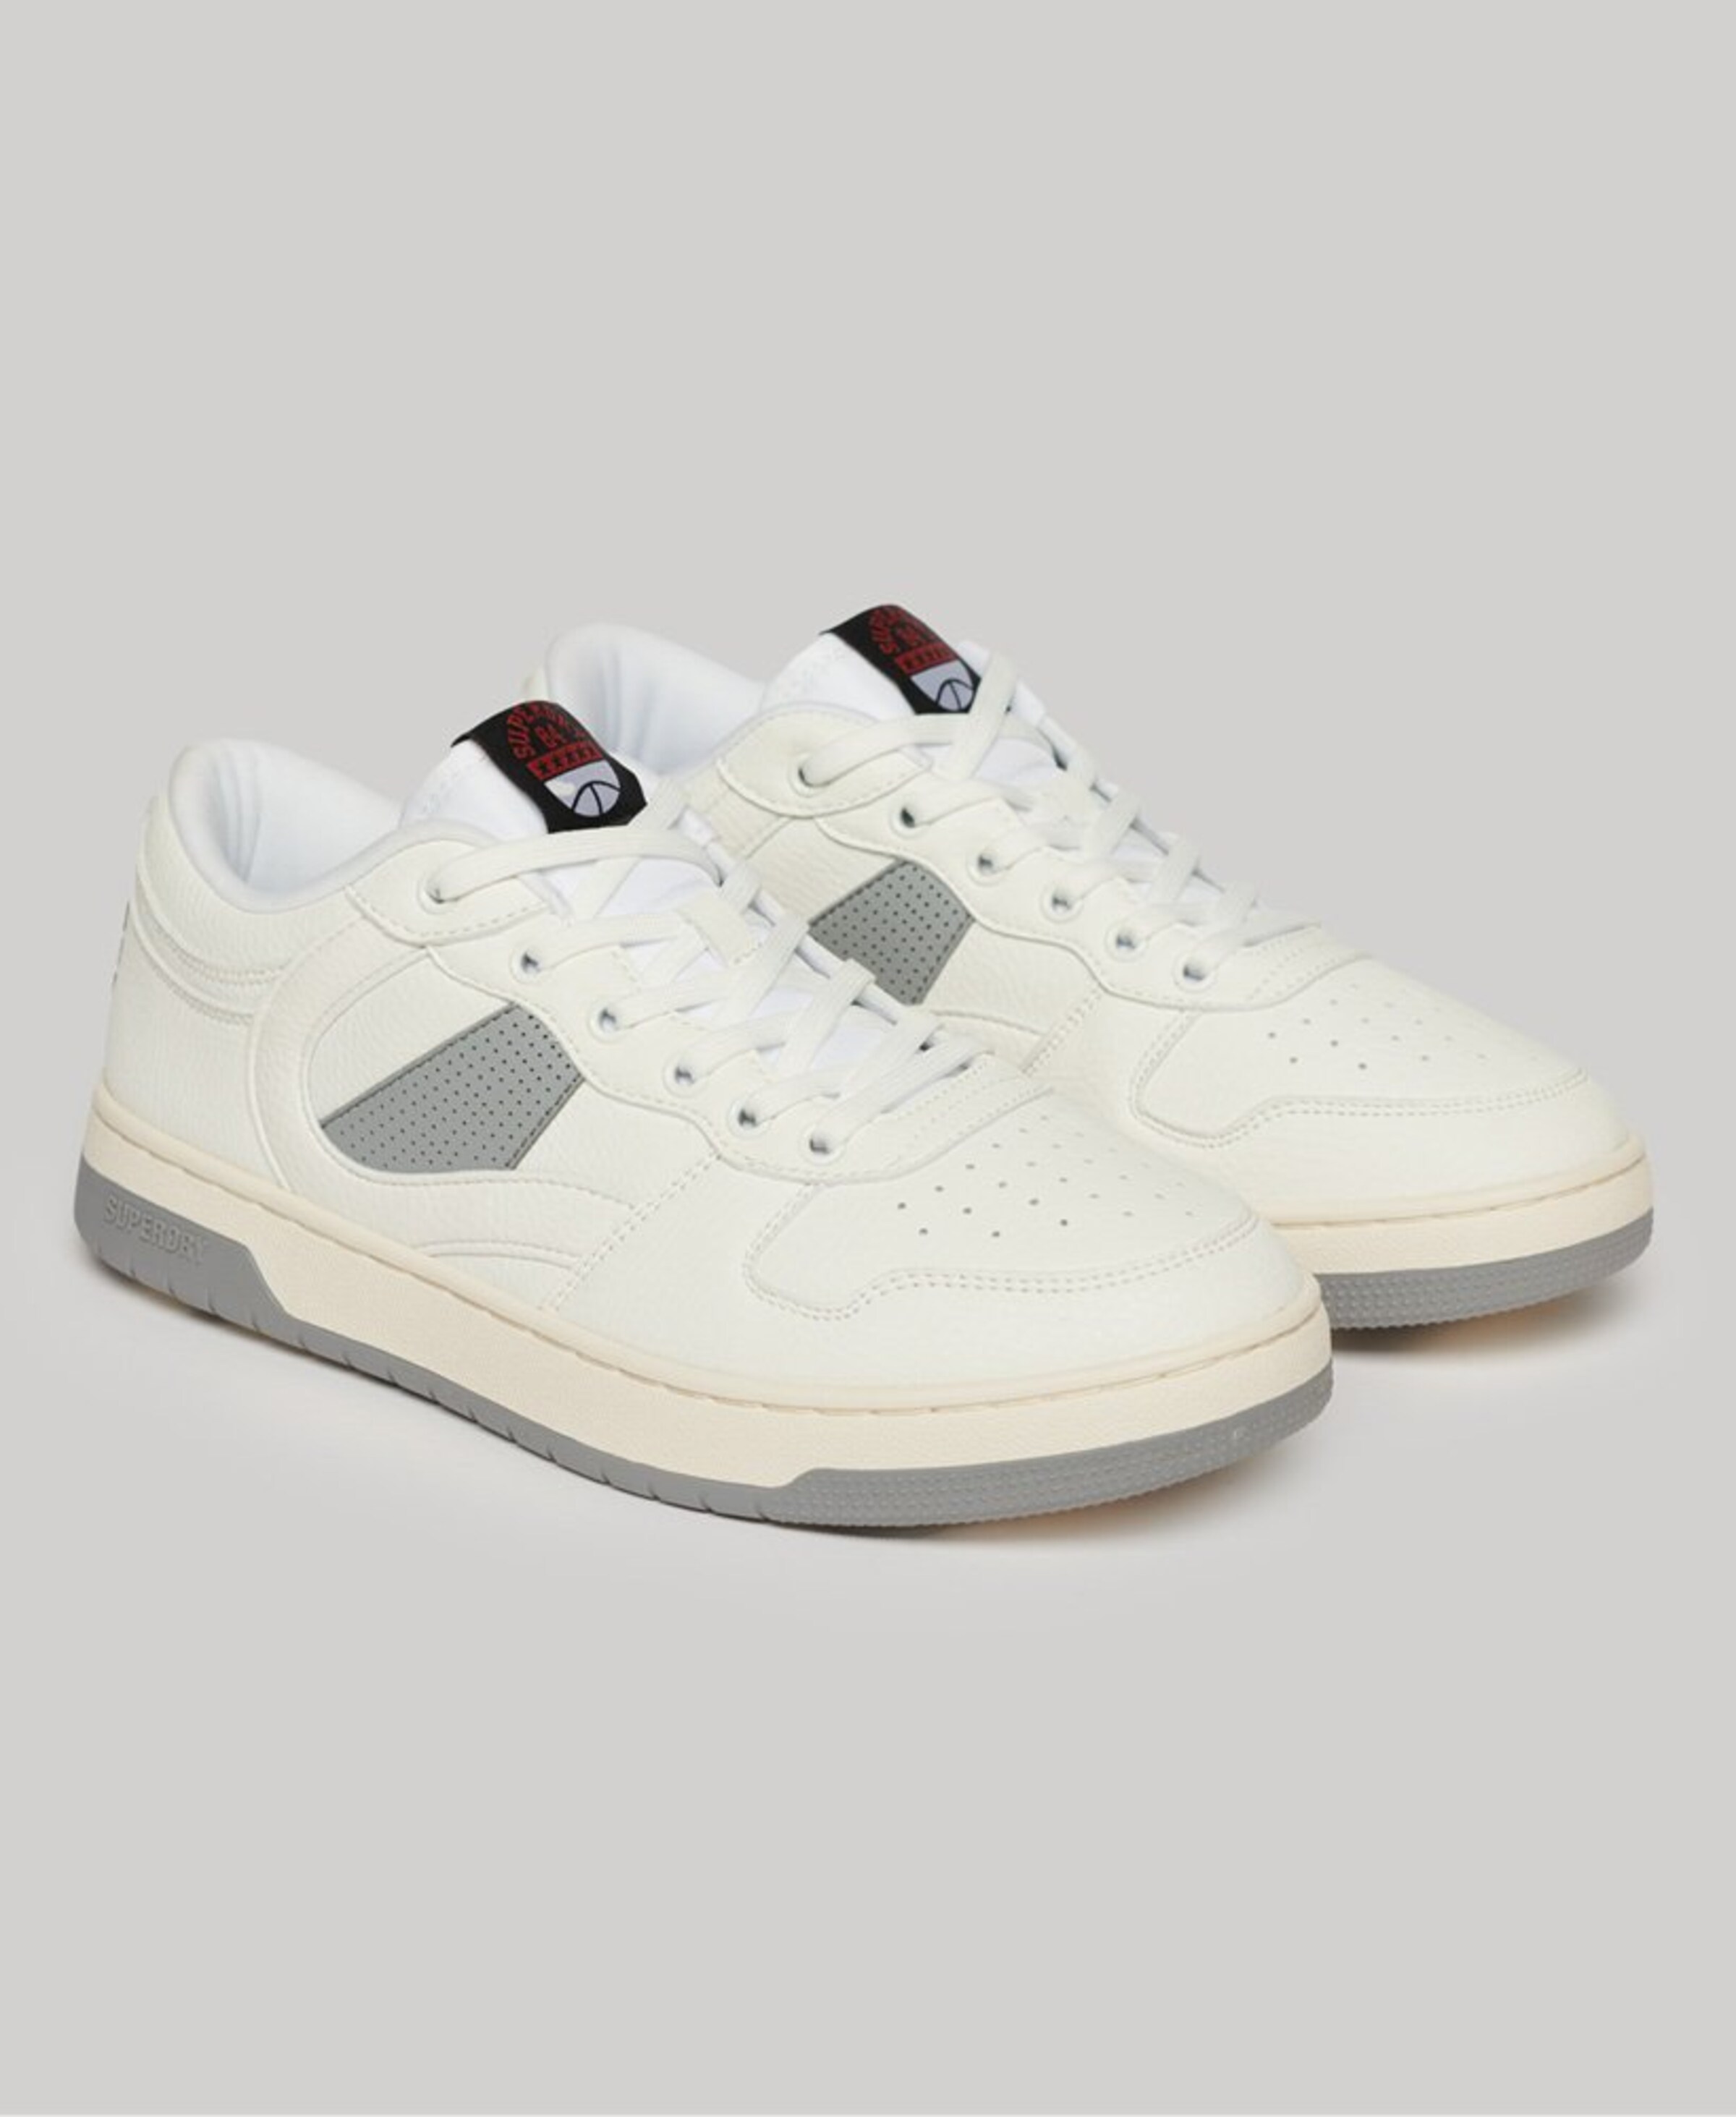 Superdry Low Pro Sneakers In White | ASOS